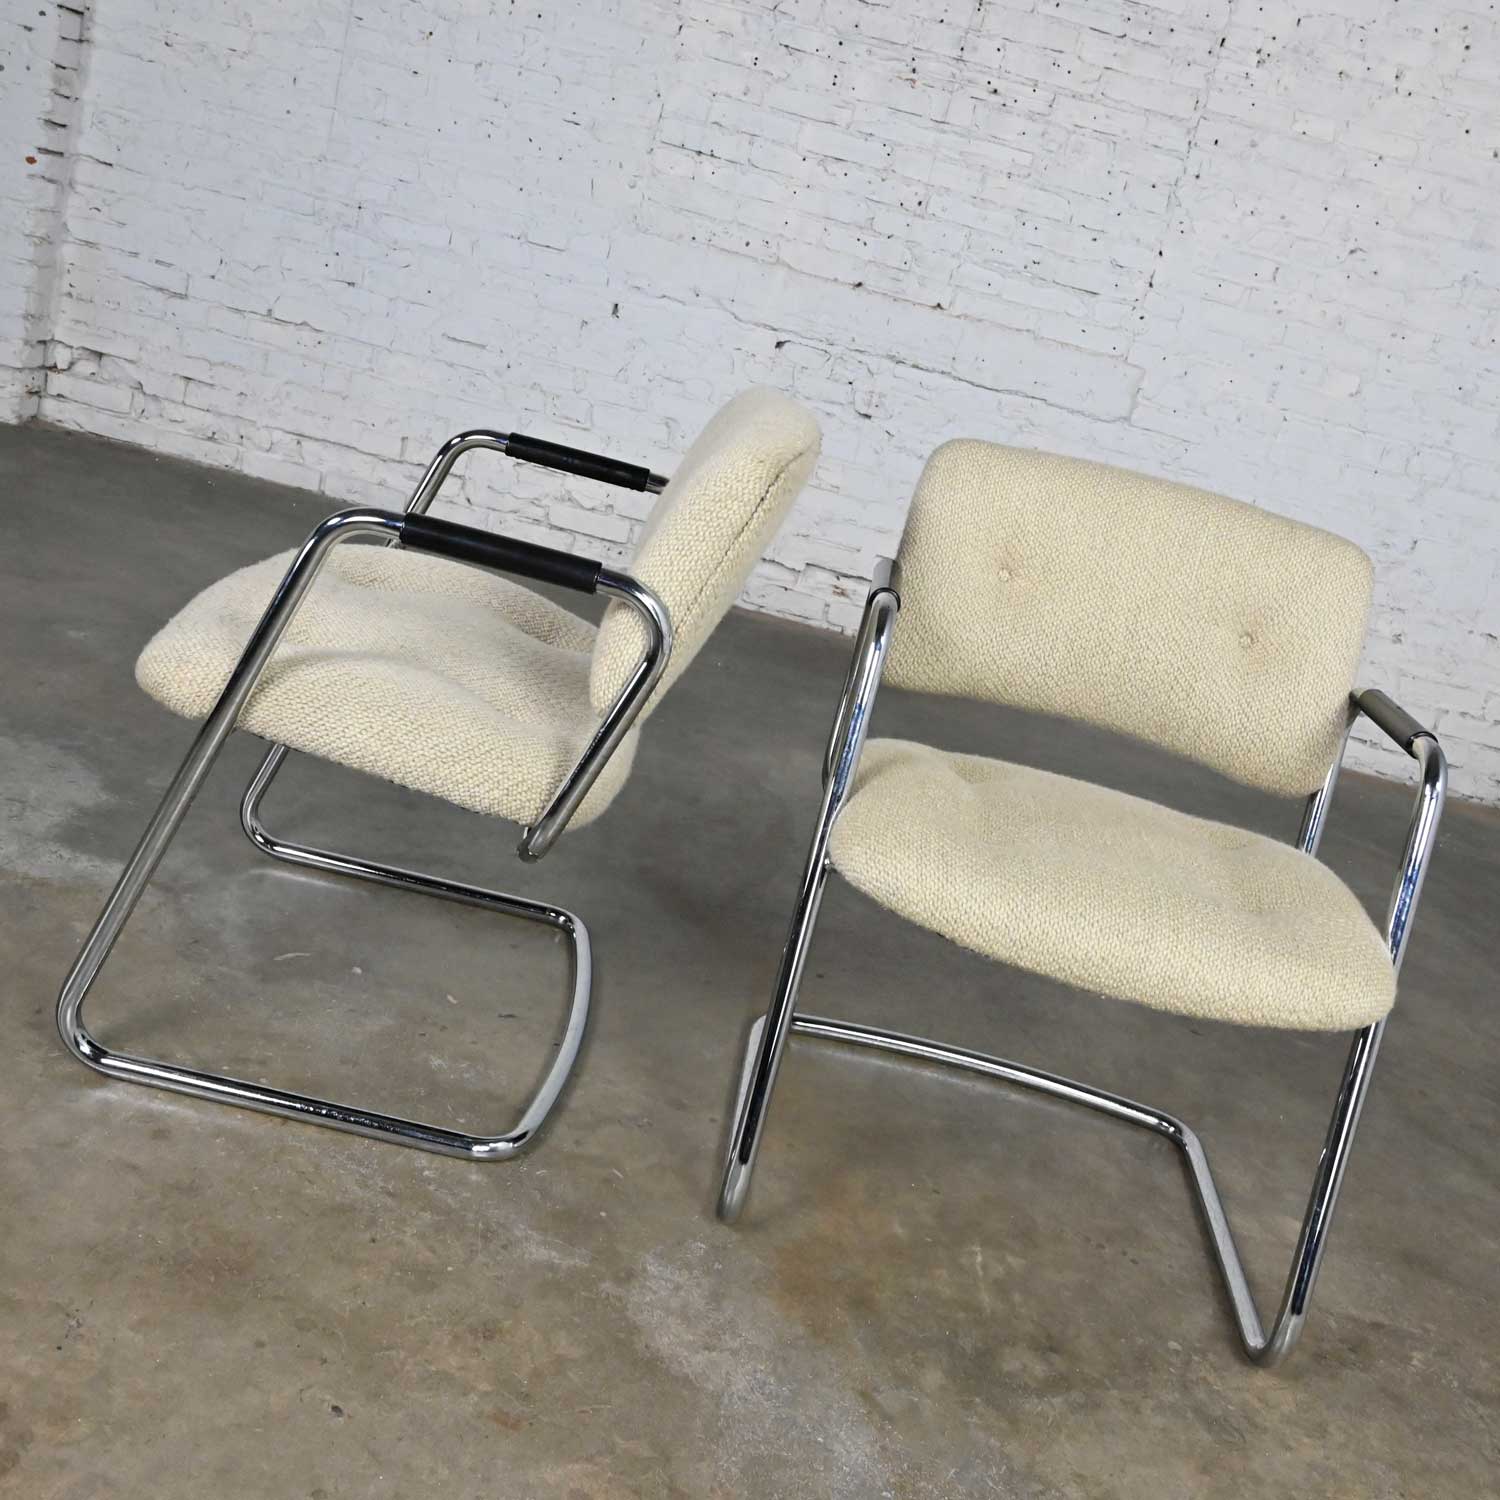 Vintage Modern Chrome Cantilever Chairs Oatmeal Hopsacking by Steelcase Model 421 482 a Pair